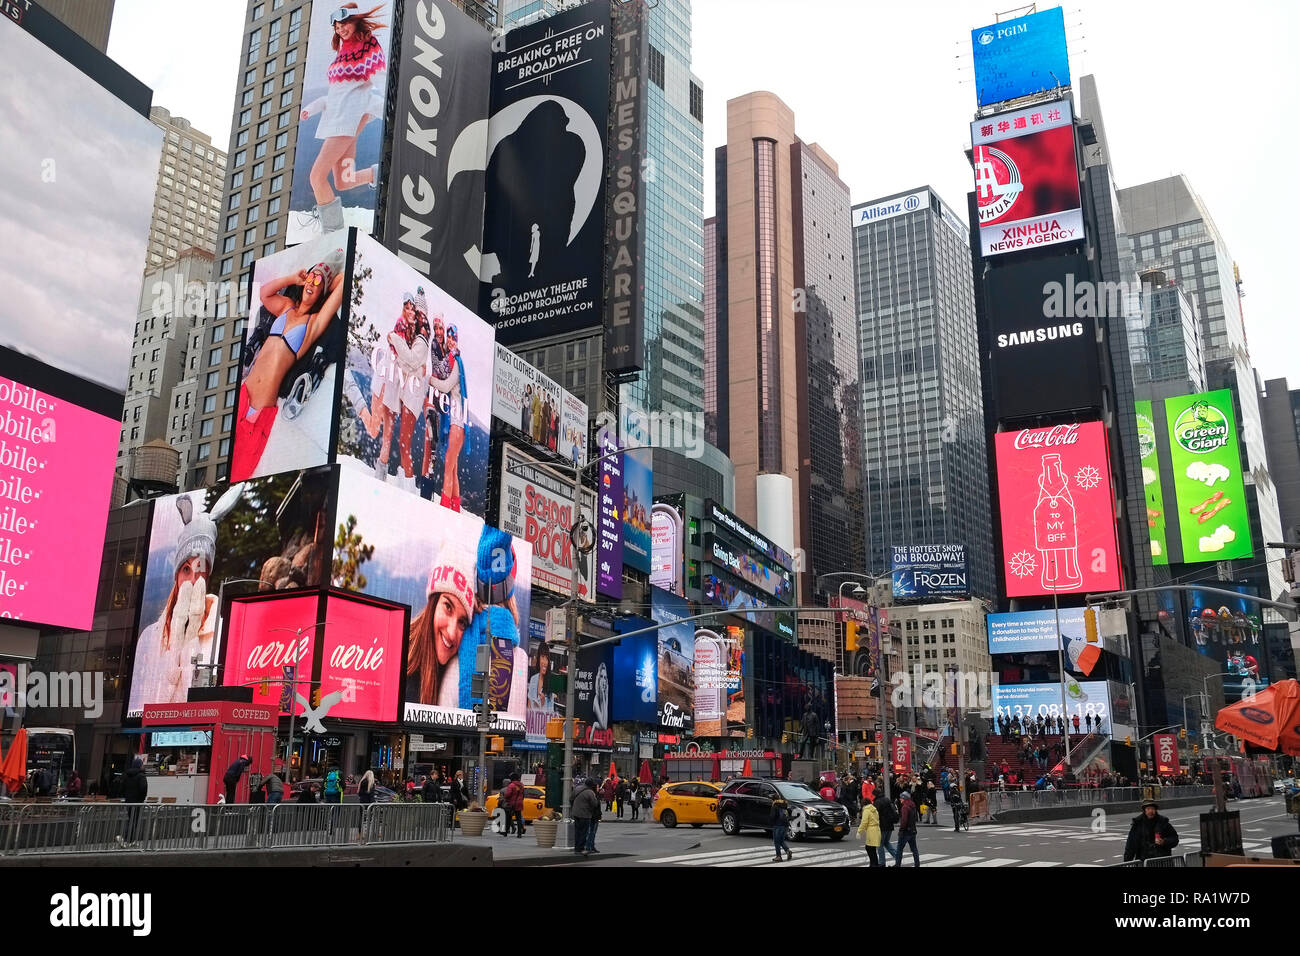 Broadway Times Square Advertising Bill Boards New York City Manhattan USA United States of America Stock Photo